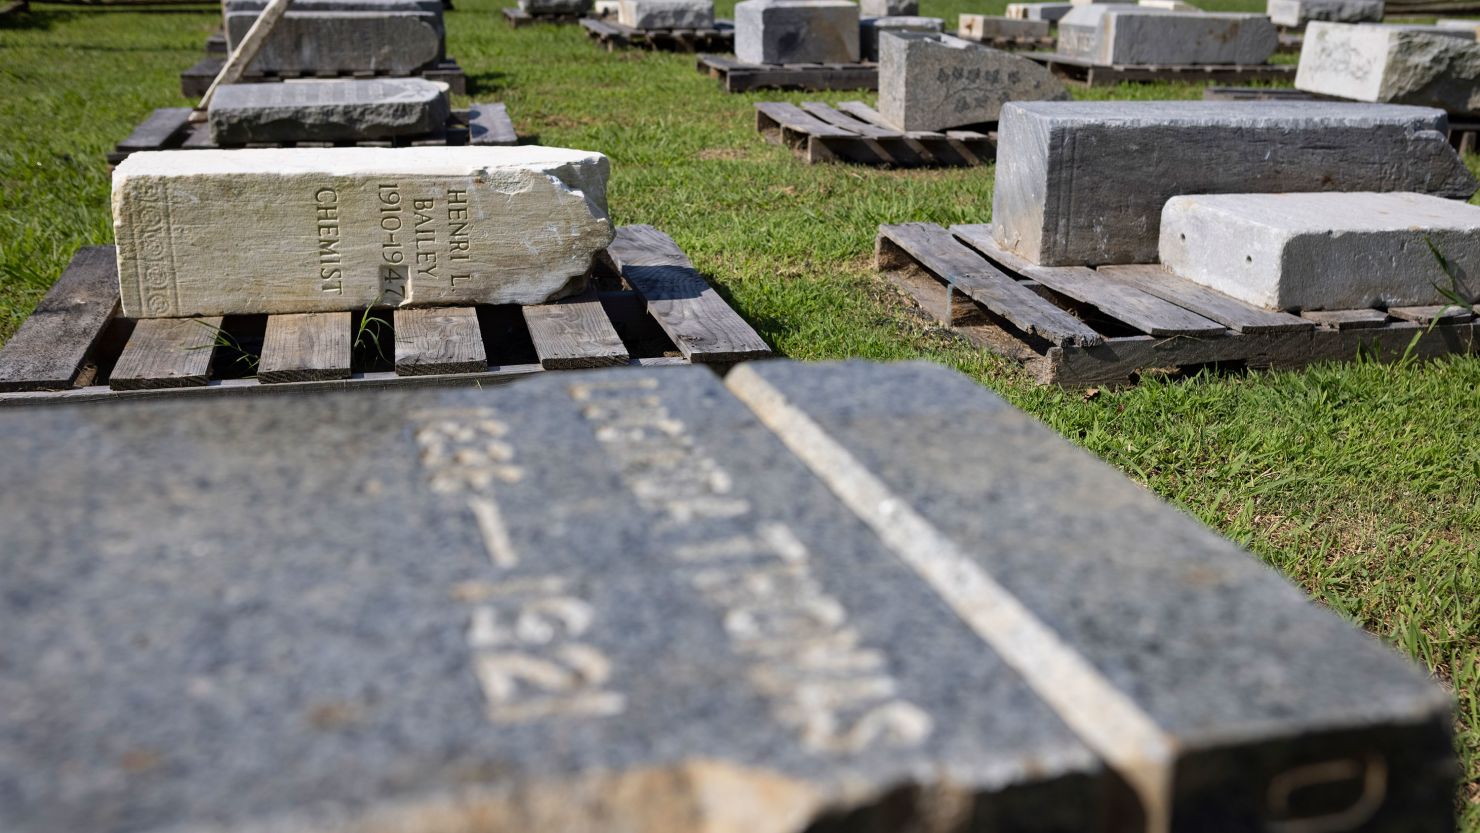 Gravestones sit on pallets during a ceremonial transfer Monday at Caledon State Park in King George, Va.